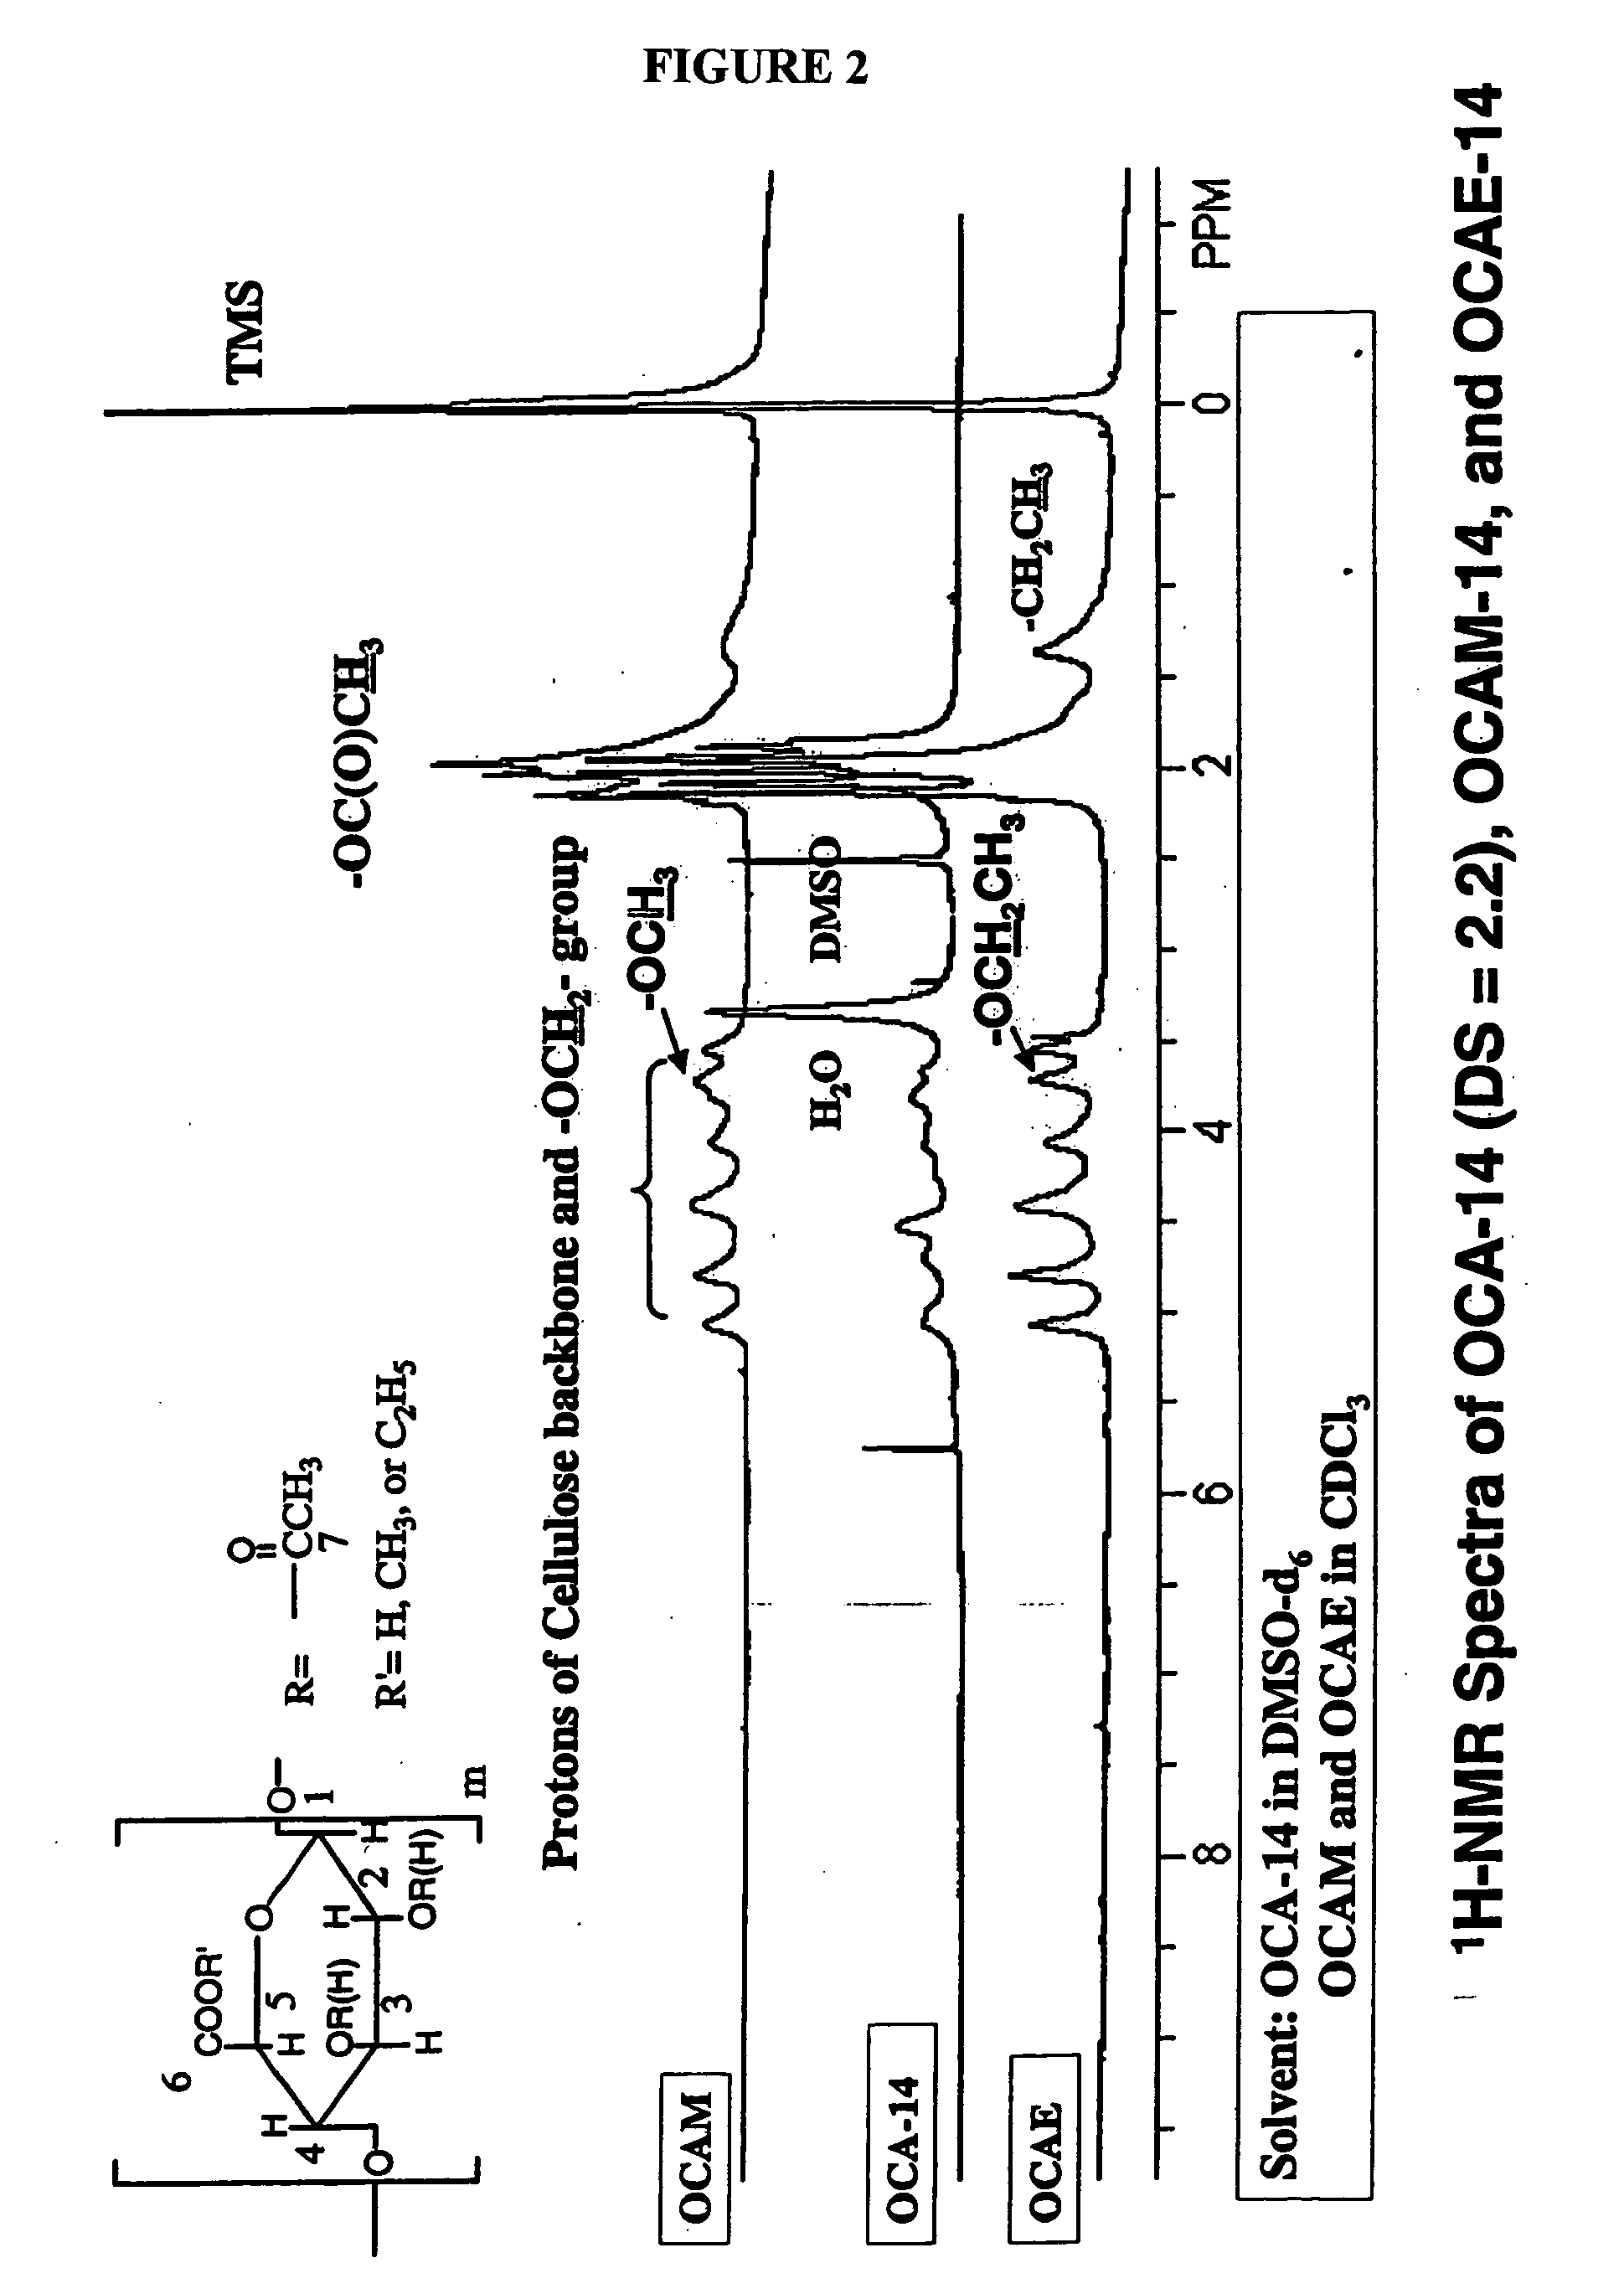 Biodegradable oxidized cellulose esters and their uses as microspheres